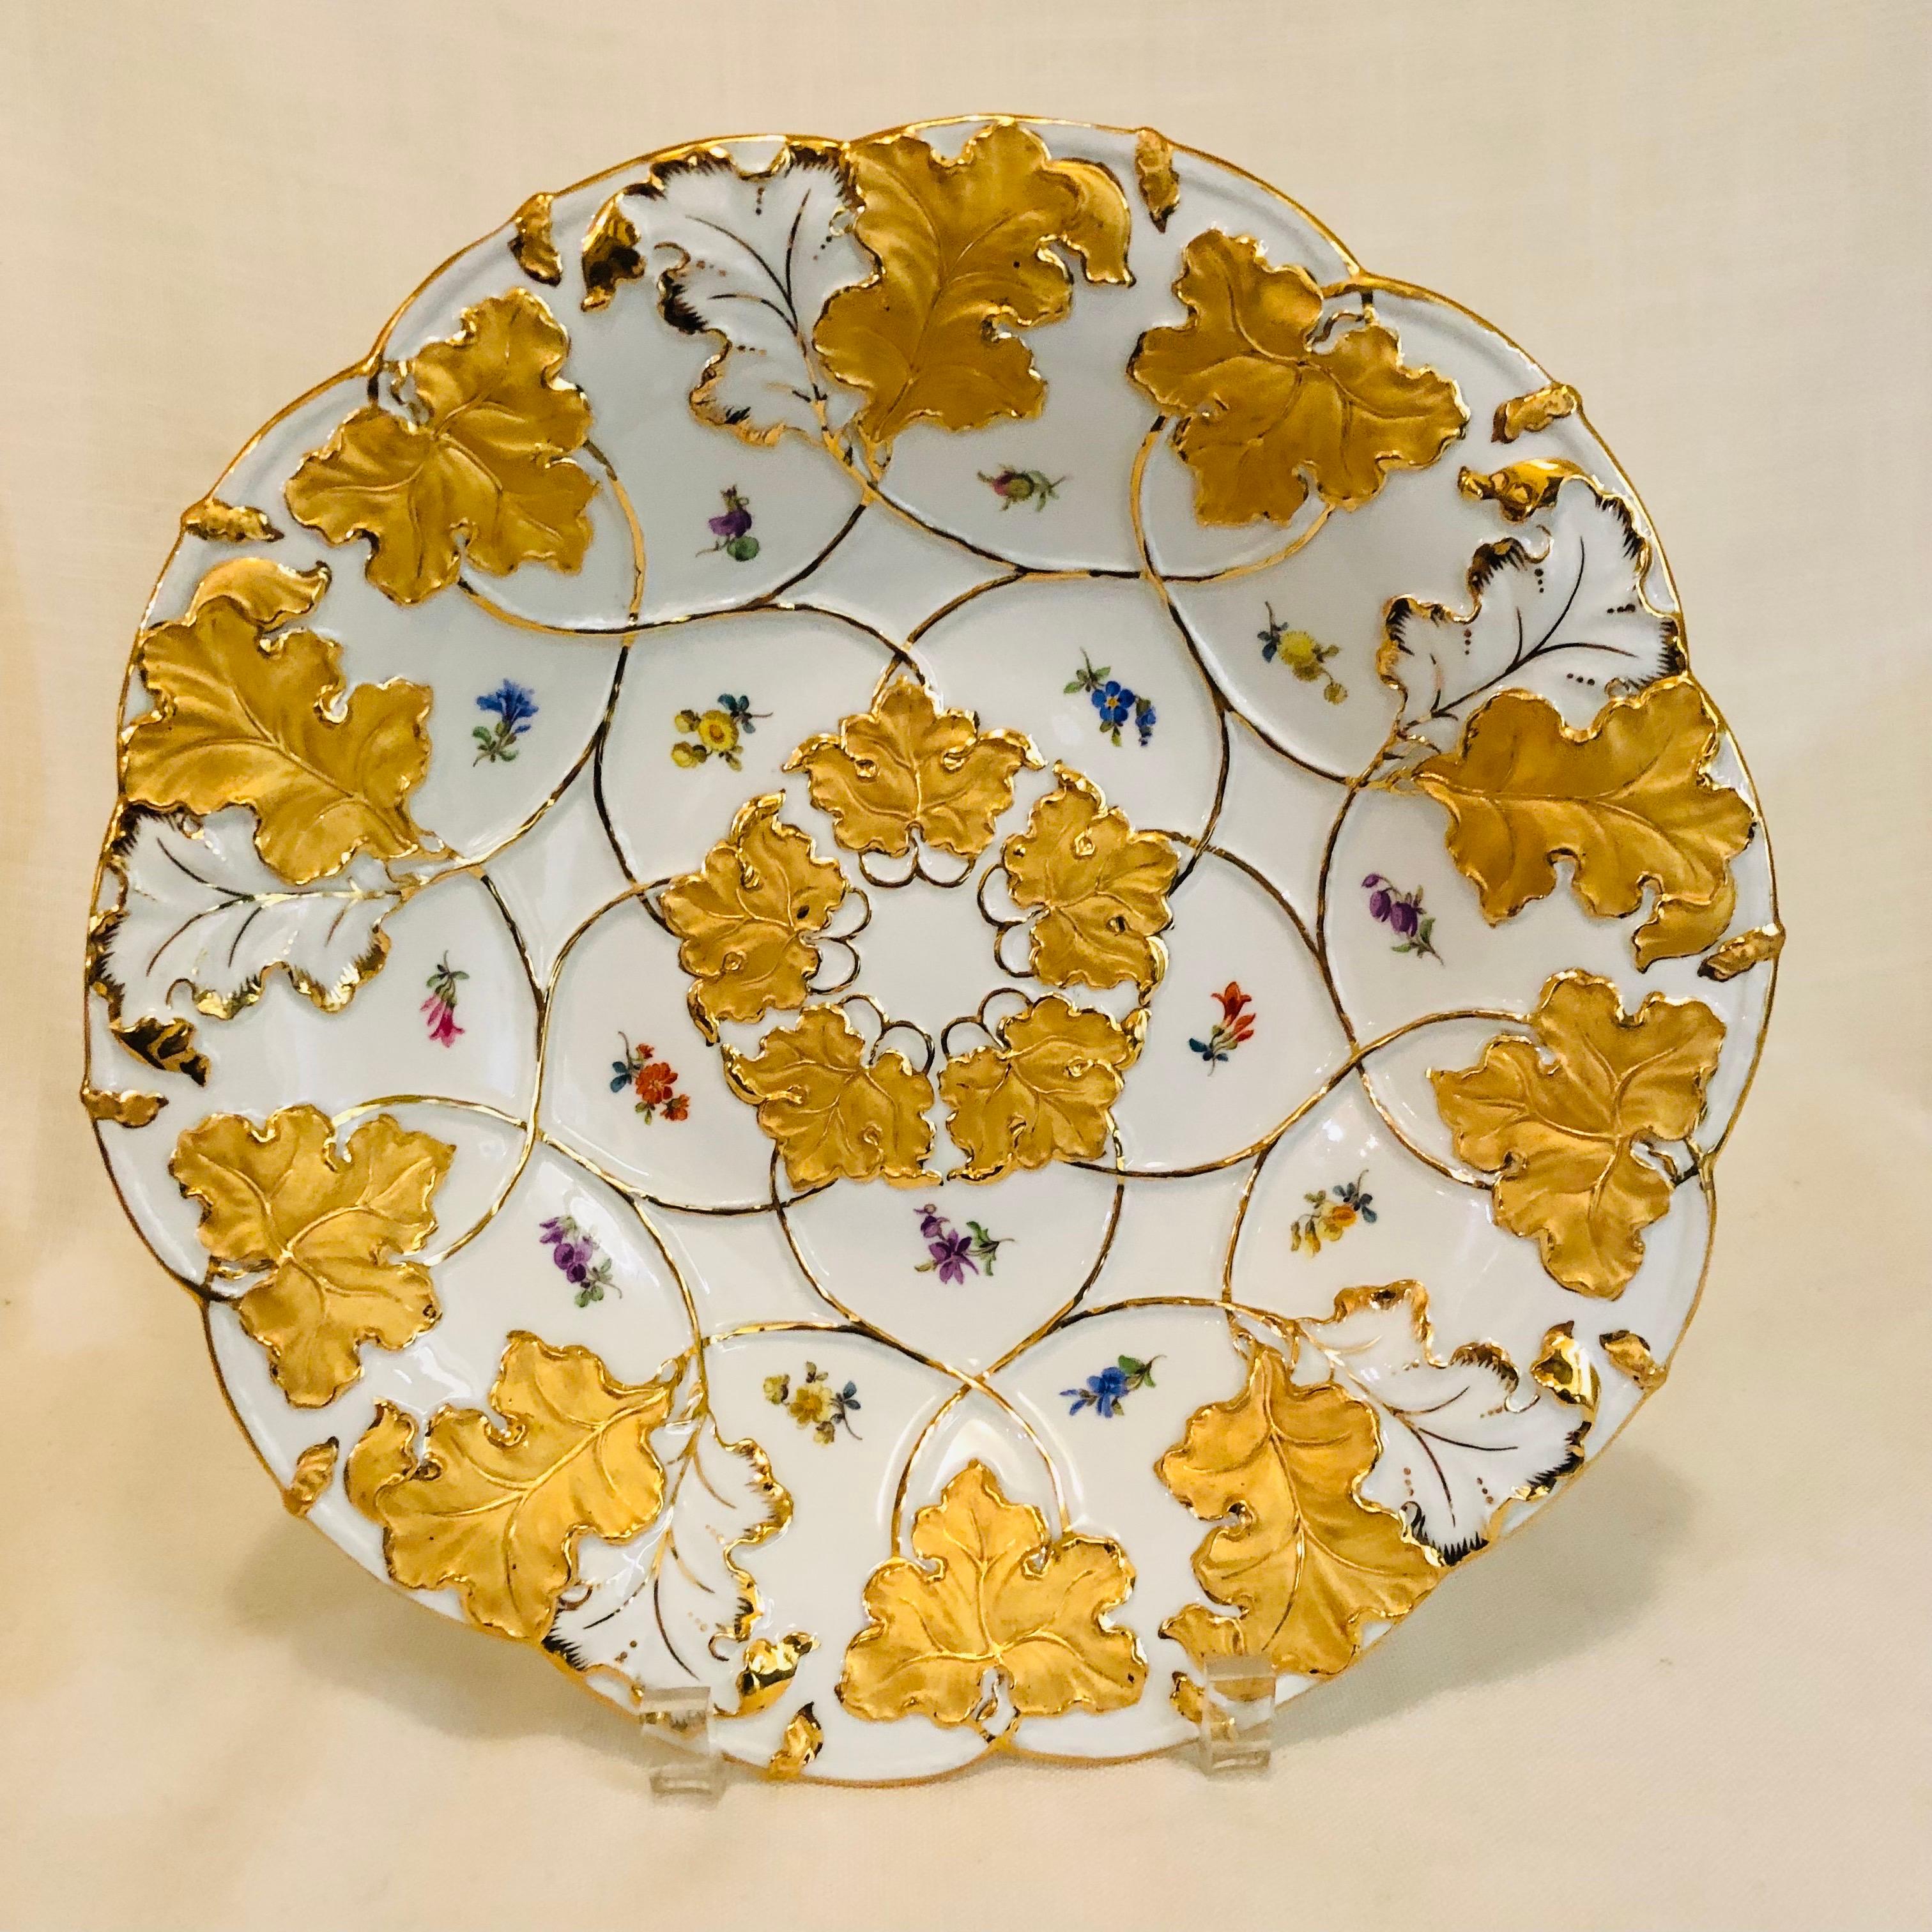 This is a fabulous Meissen Charger which is decorated with a border of gilded acanthus leaves. The center of this charger has a circle of more gilded acanthus leaves. The beautiful gilding on this Meissen charger is definitely very eye-catching. The